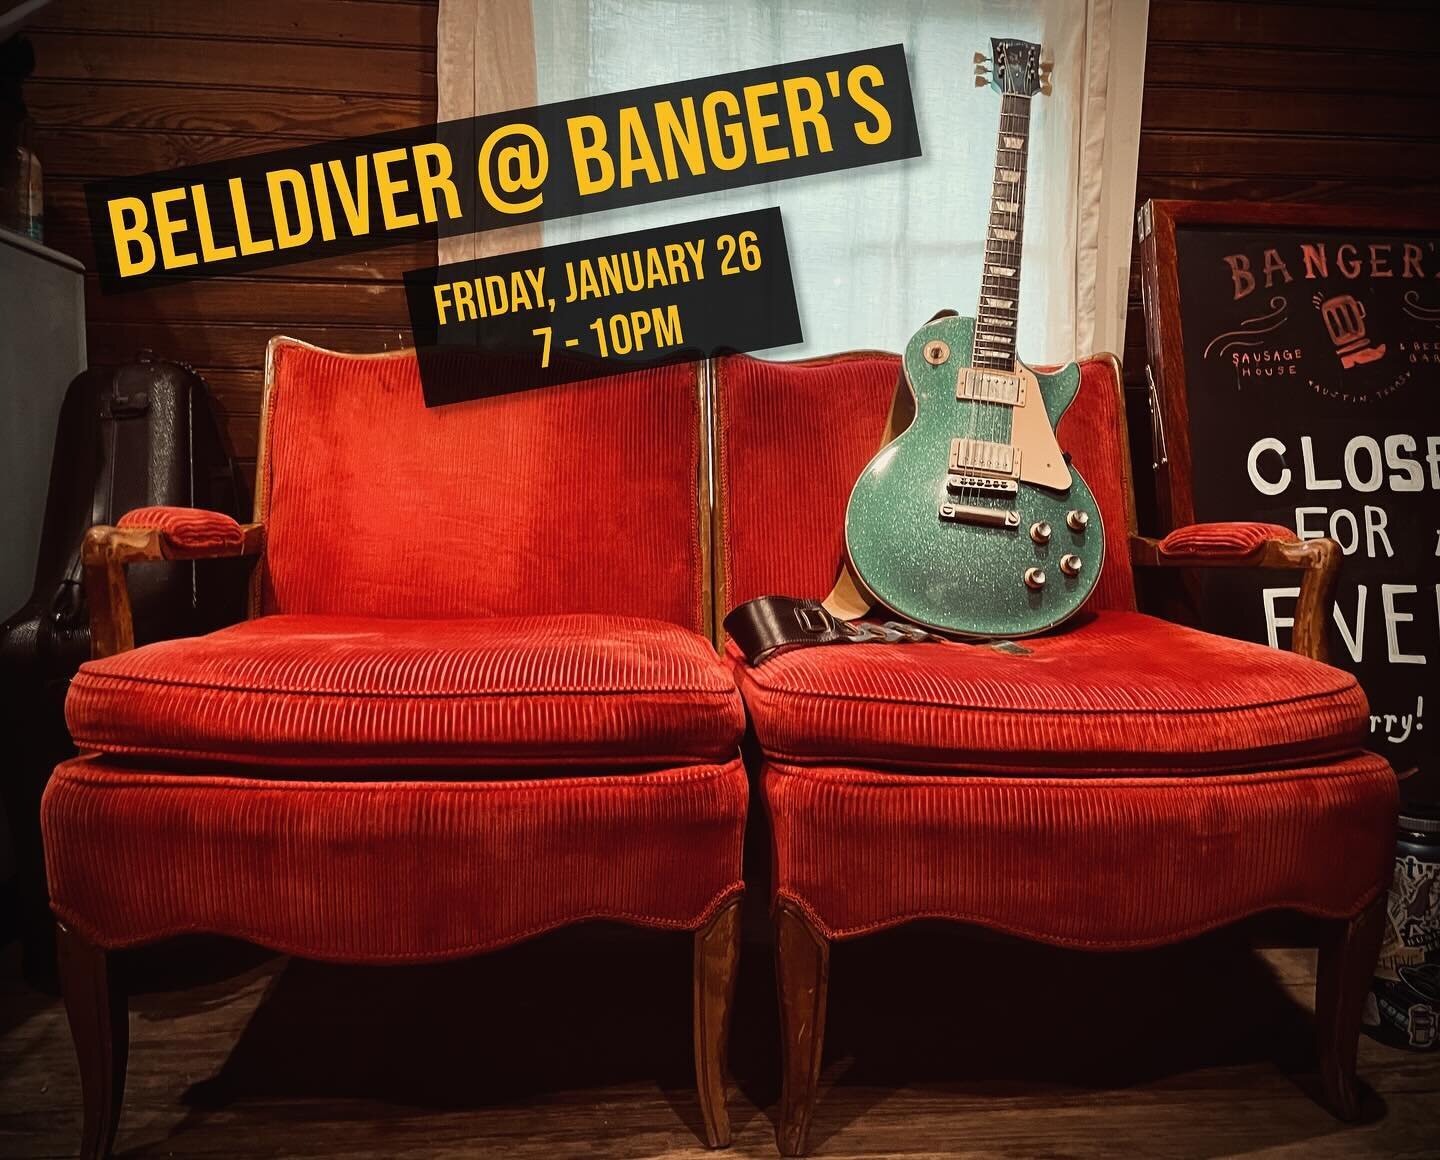 Join us at @bangersaustin this Friday for beer, brats, and Belldiver. The three essential B&rsquo;s. See you there!